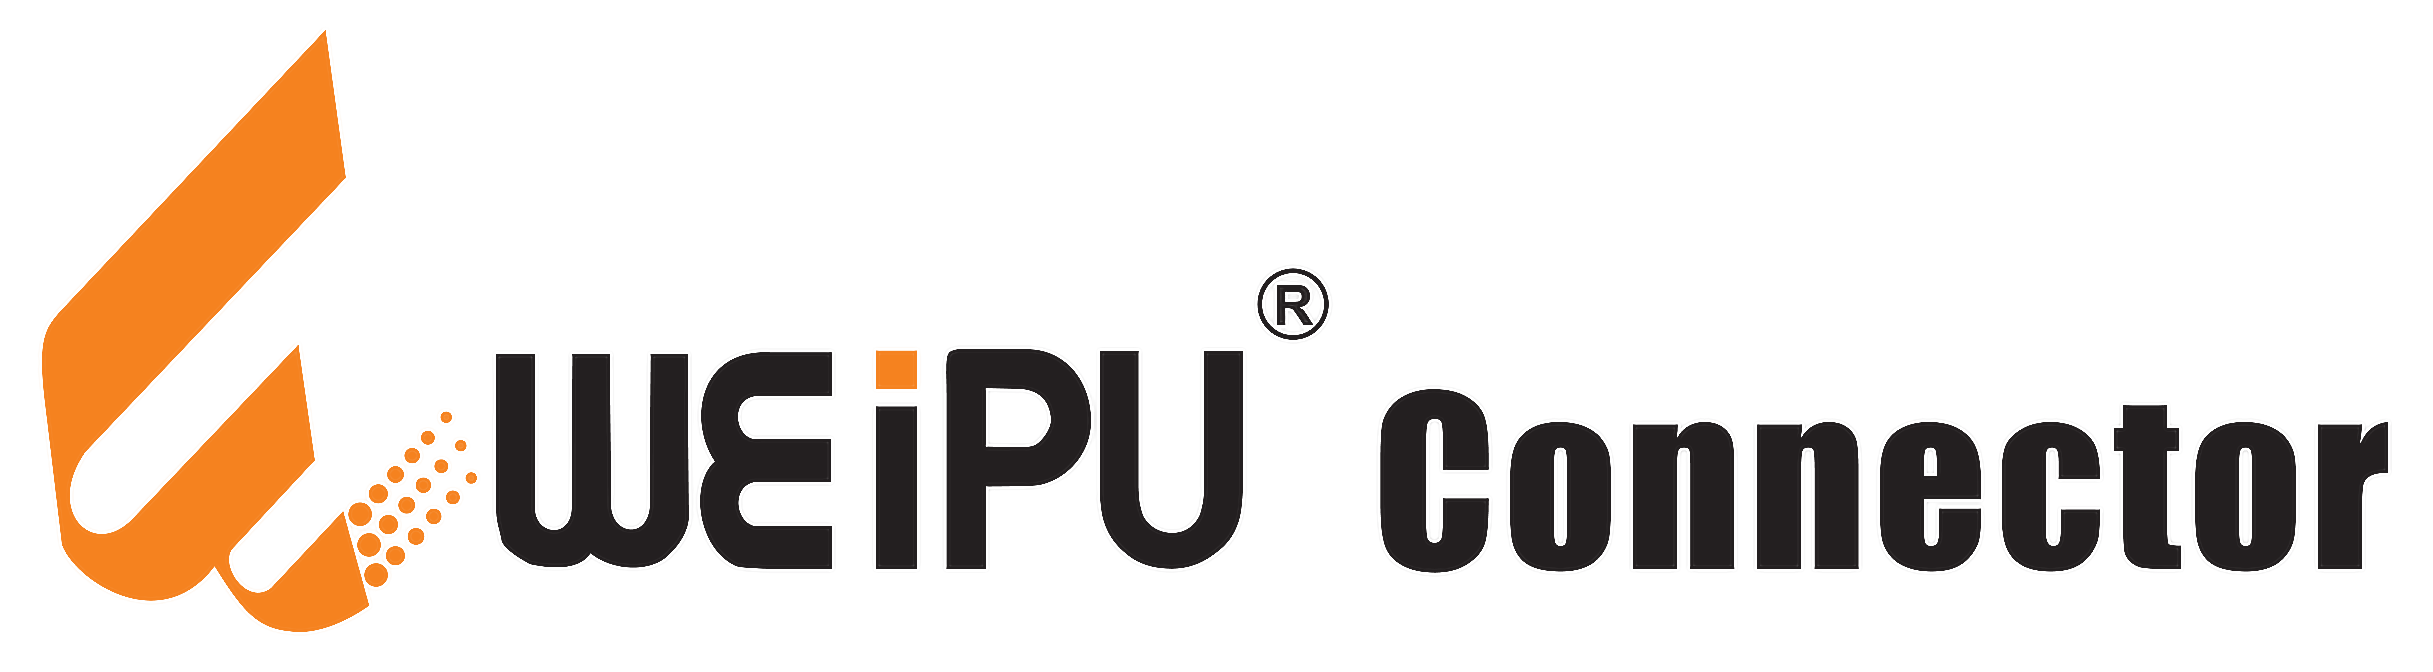 Weipu Connector